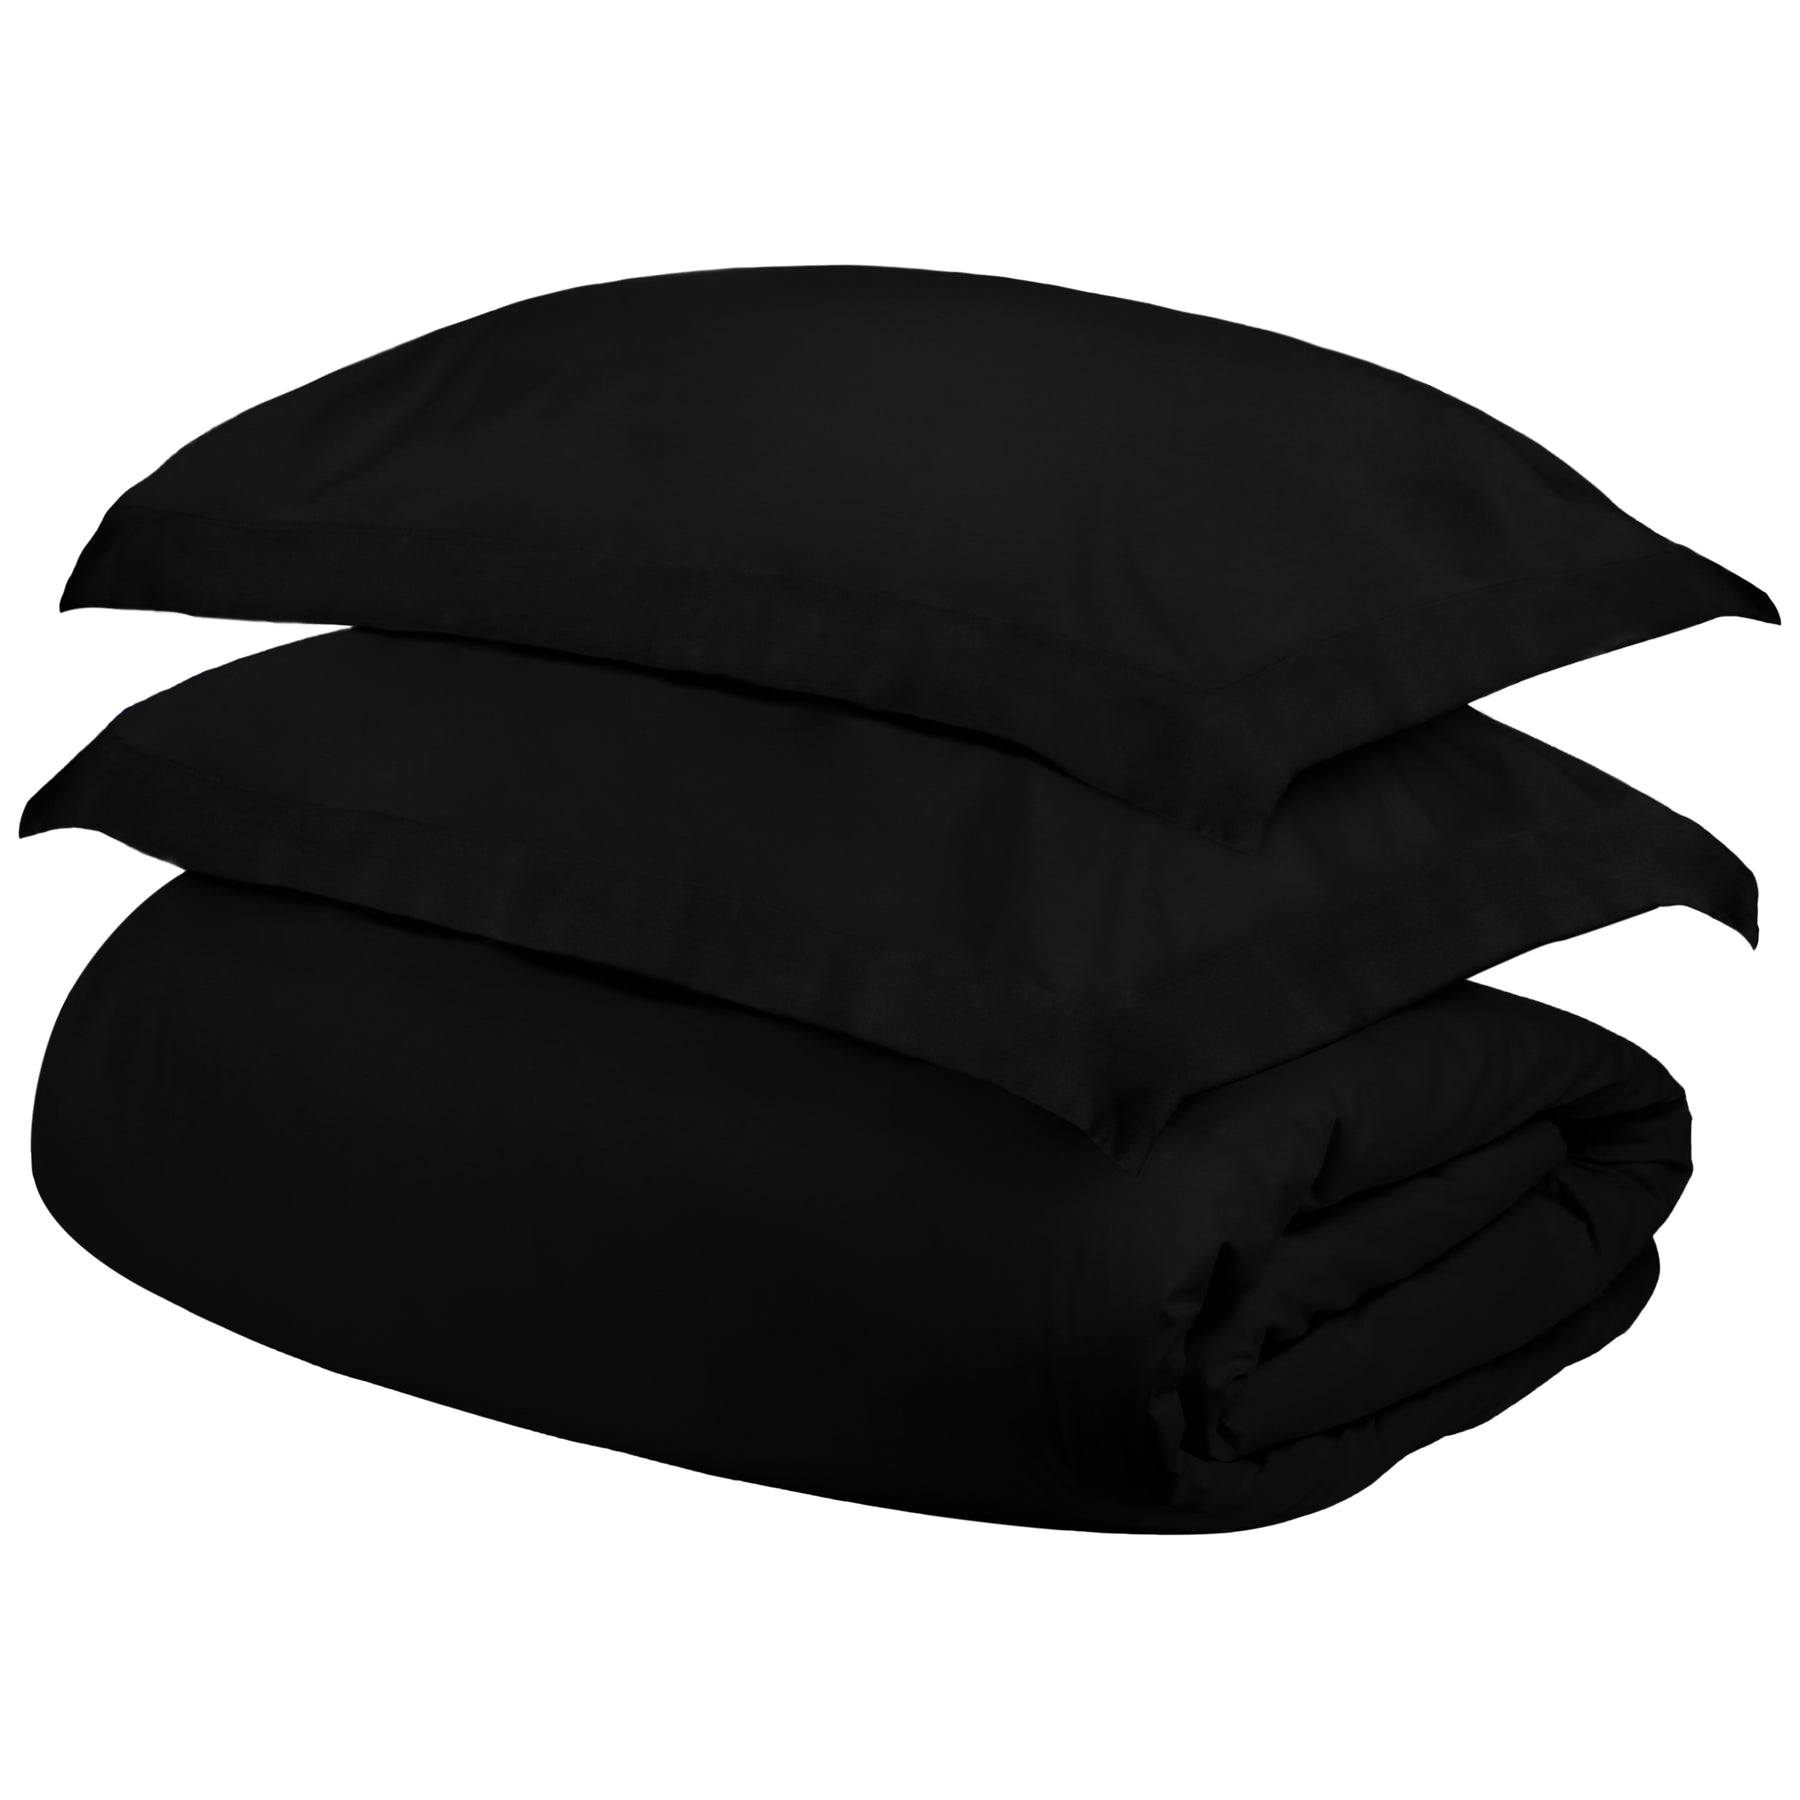 Superior Egyptian Cotton 300 Thread Count Solid Duvet Cover Set - Black